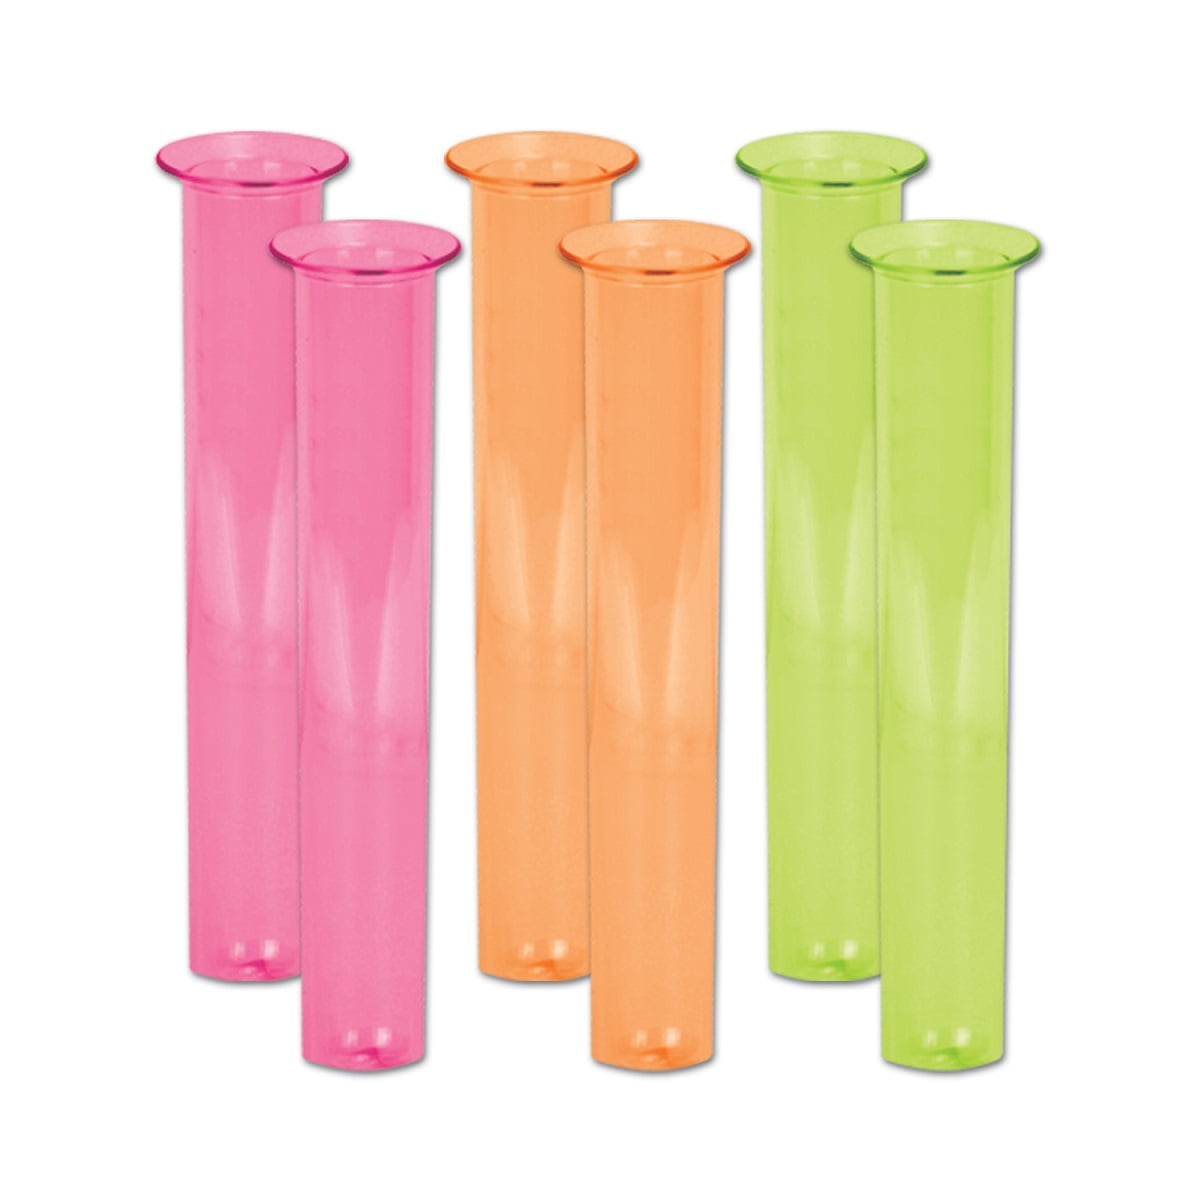 Club Pack of 72 Pink and Orange Neon Test Tube Shot Glass Party Favors 2 oz...